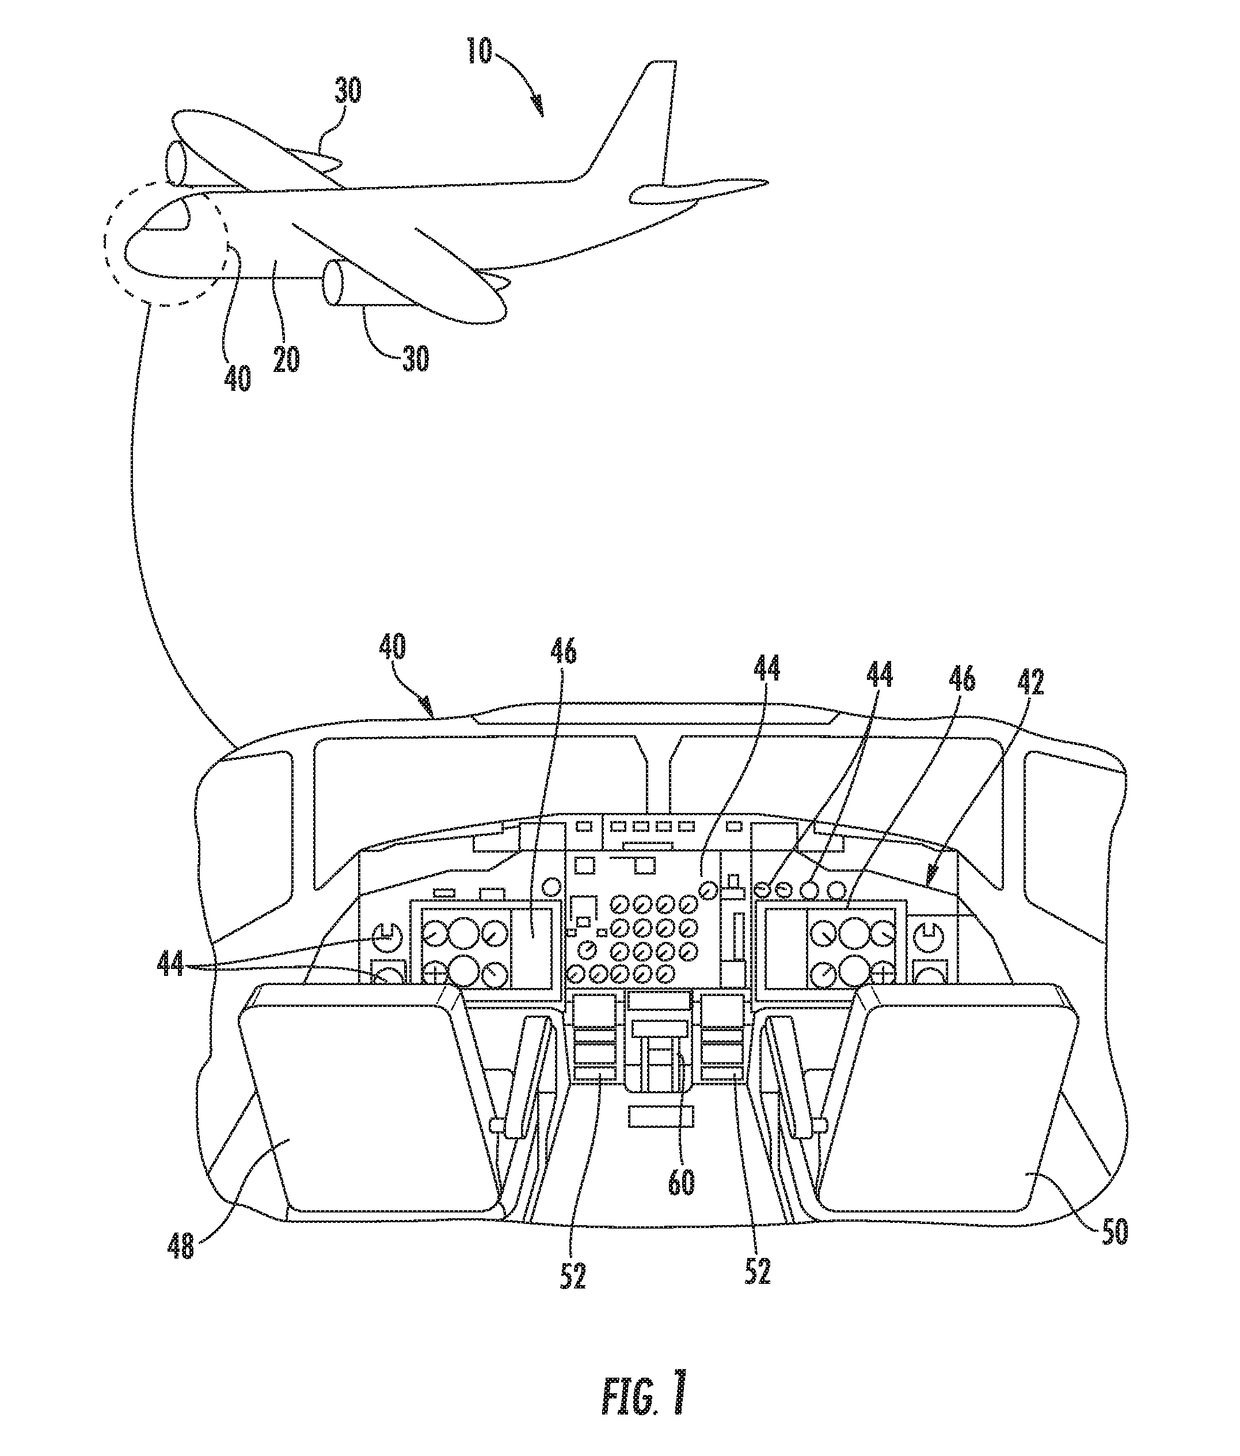 System and Method for Monitoring a Cockpit of an Aircraft